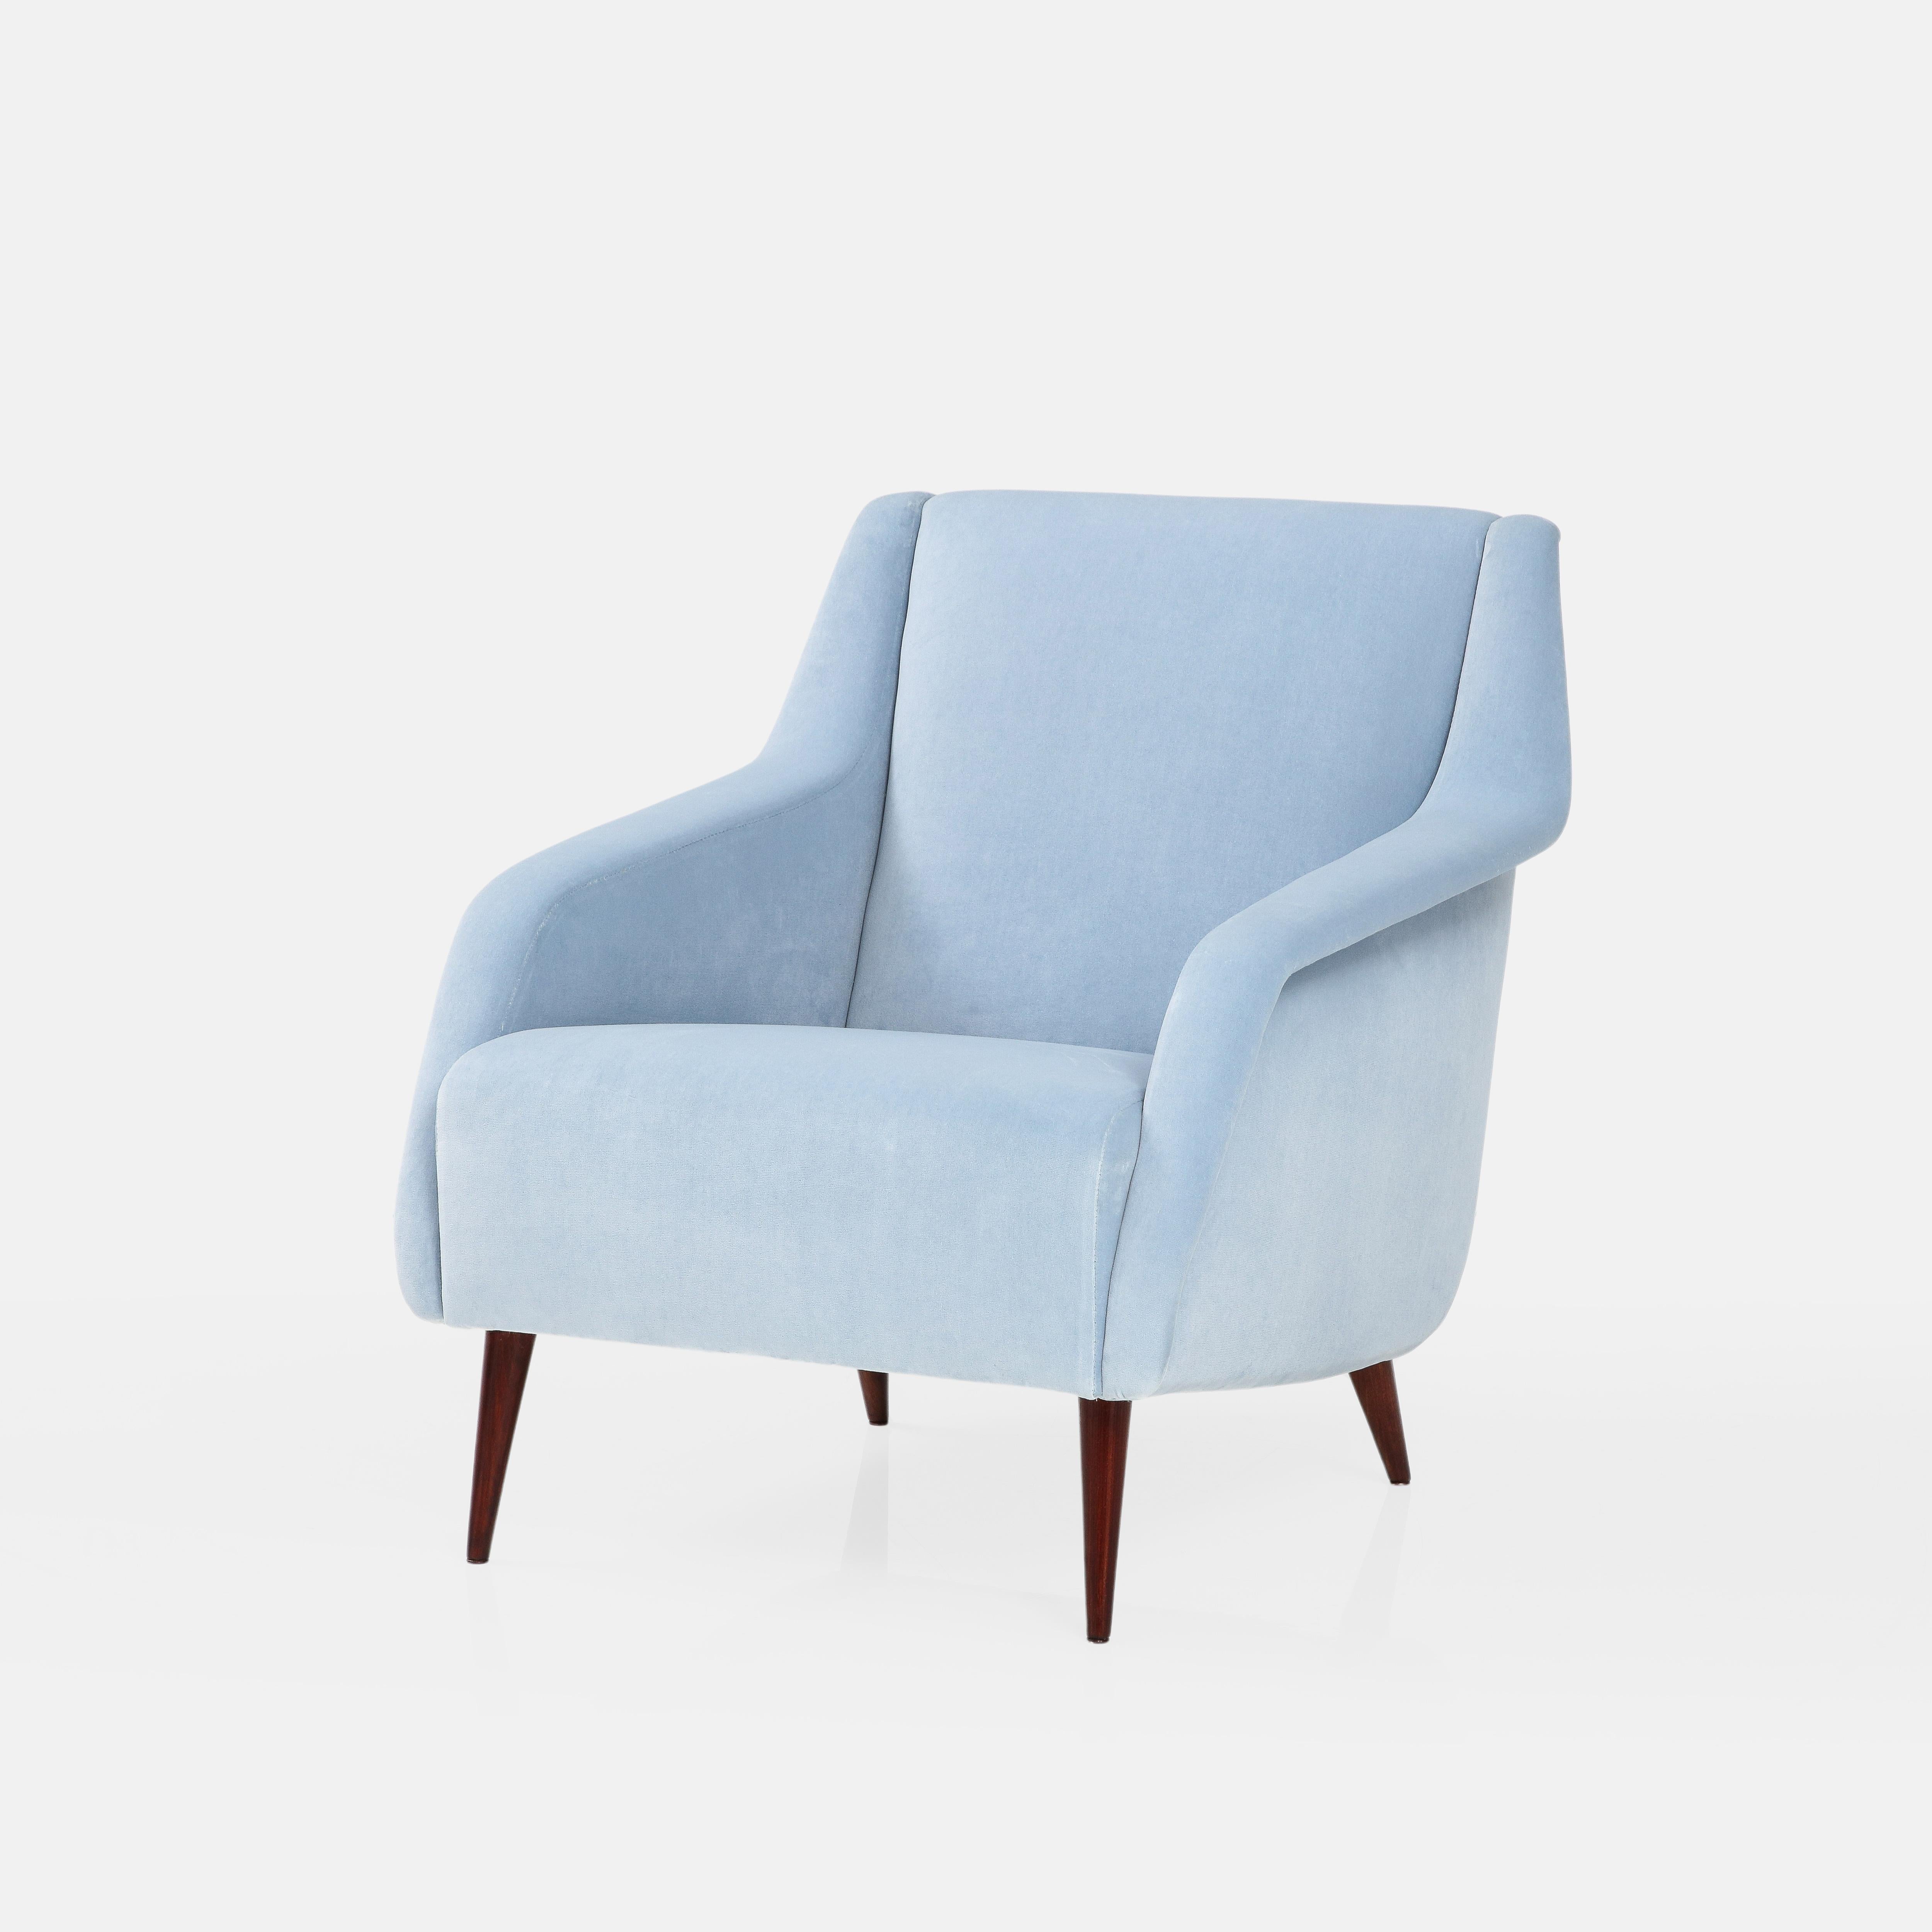 Carlo De Carli for Cassina Pair of Armchairs Model 802 in Light Blue Velvet In Good Condition For Sale In New York, NY